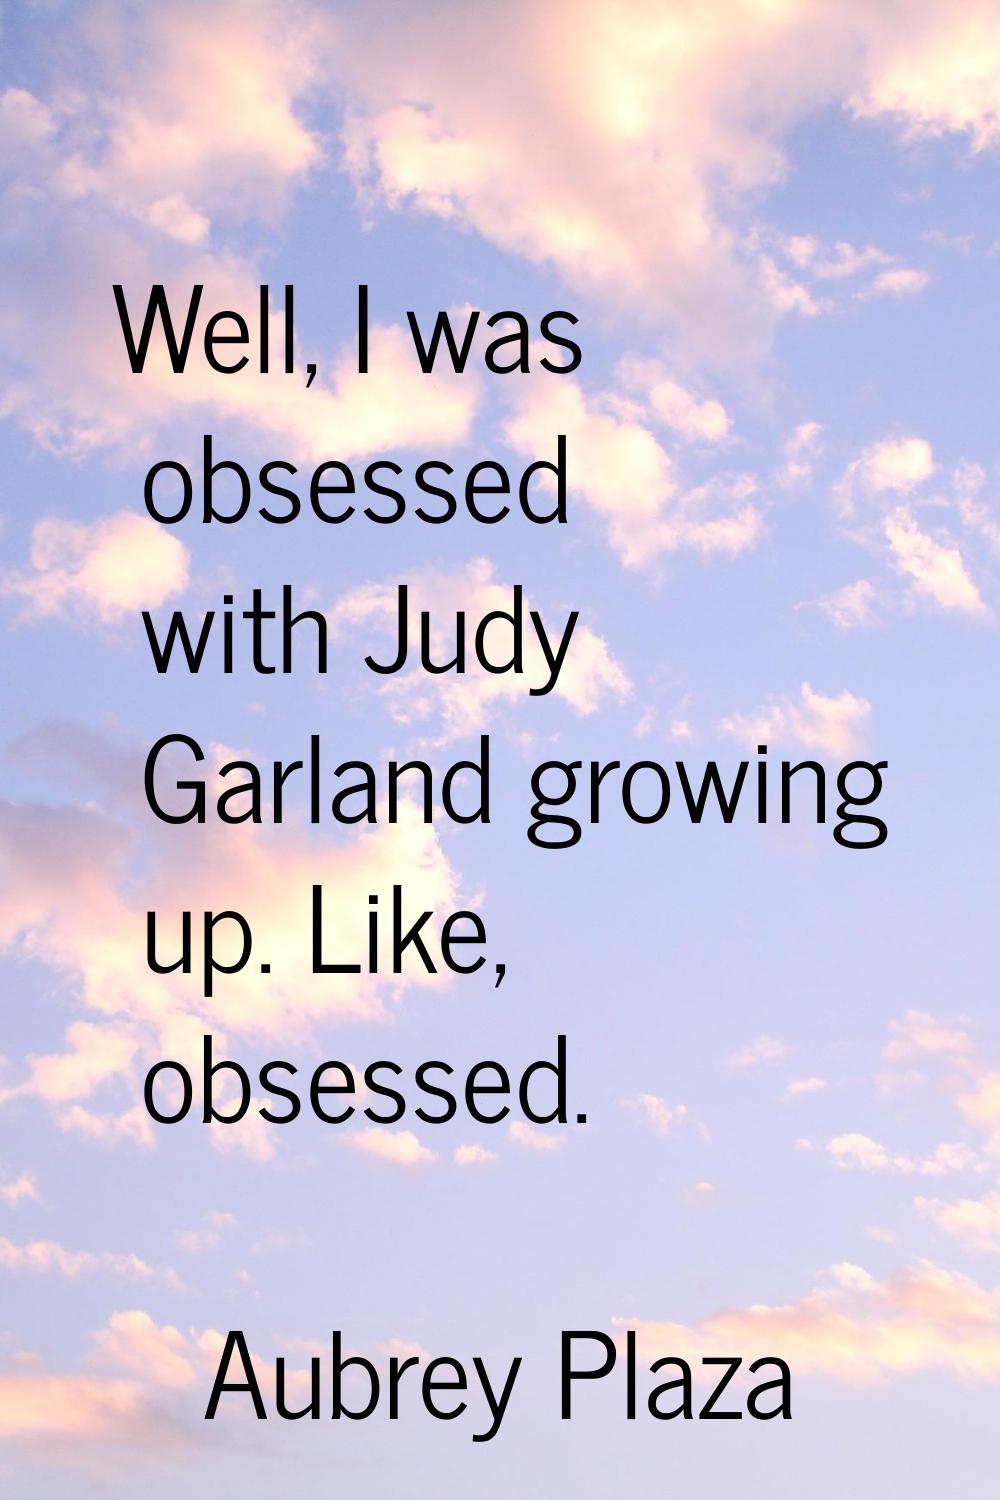 Well, I was obsessed with Judy Garland growing up. Like, obsessed.